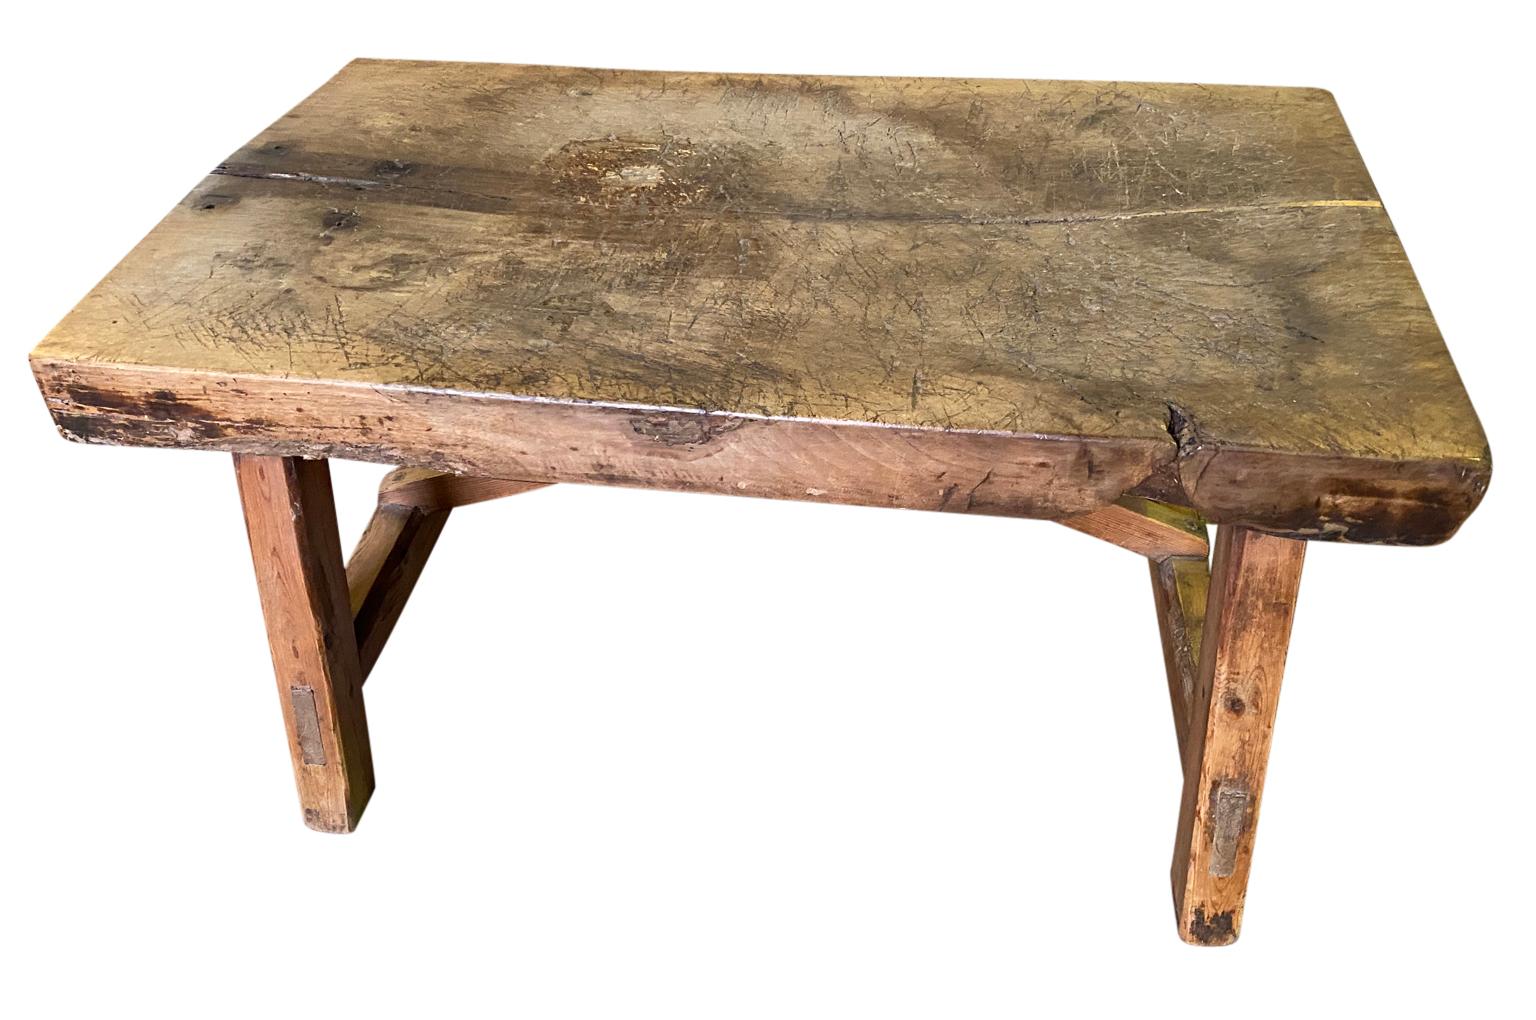 A very handsome mid-19th century table basse - coffee table from the Catalan region of Spain. Soundly constructed from Meleze and Beech woods. Wonderful for a rustic environment or modern.